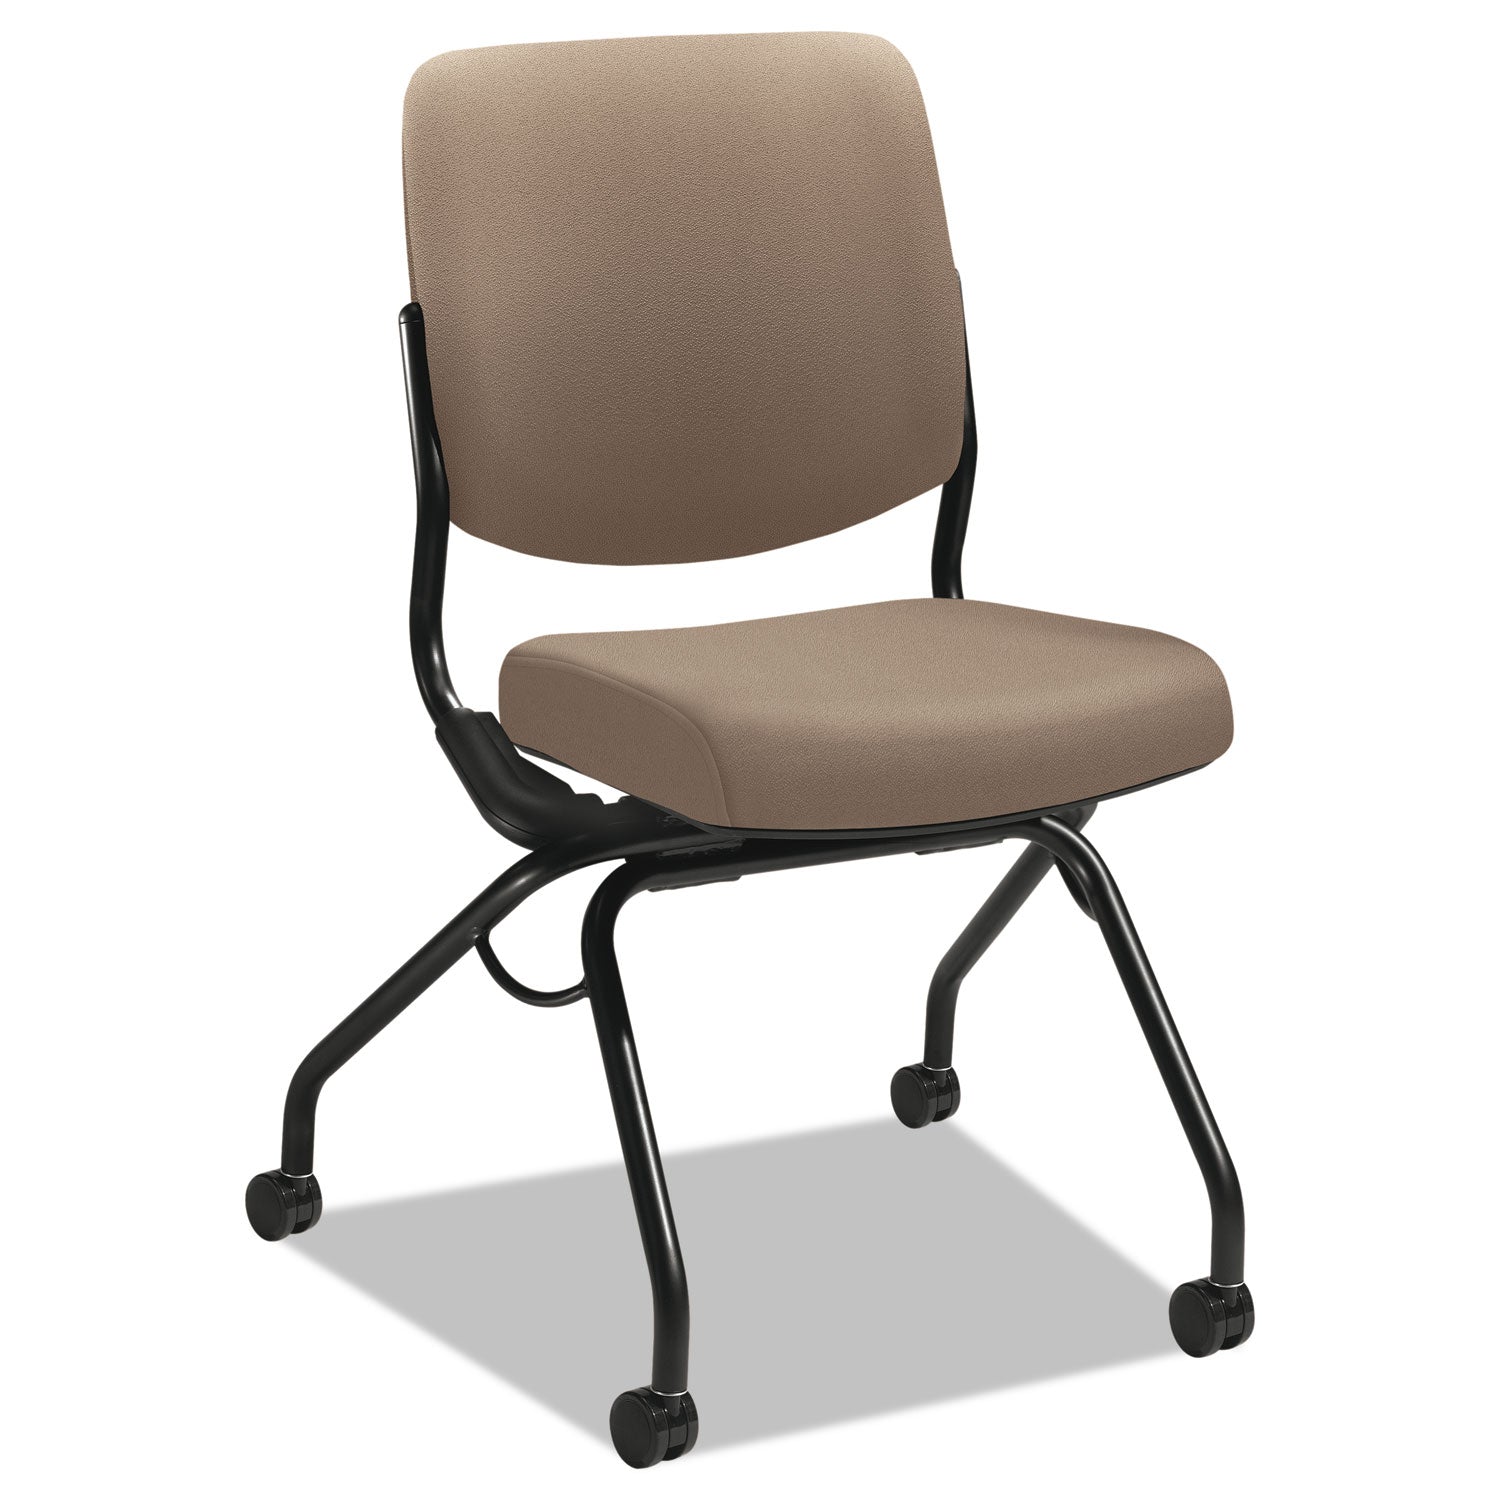 Perpetual Series Folding Nesting Chair, Supports Up to 300 lb, 19.13" Seat Height, Morel Seat, Morel Back, Black Base - 